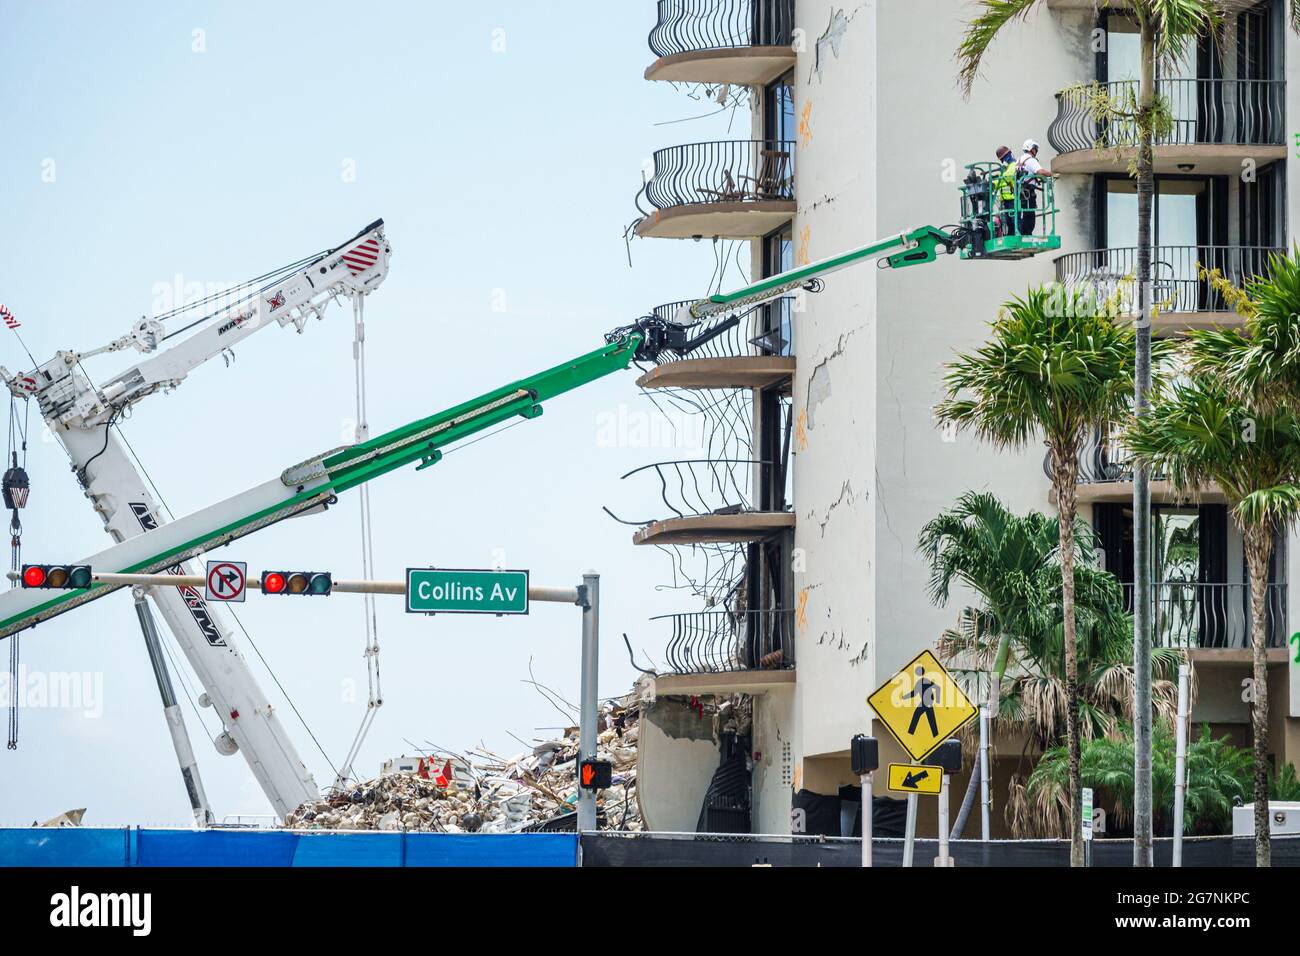 Florida Miami Surfside Champlain Towers South condo condominium building collapse collapsed disaster remaining vacated portion still standing preparin Stock Photo